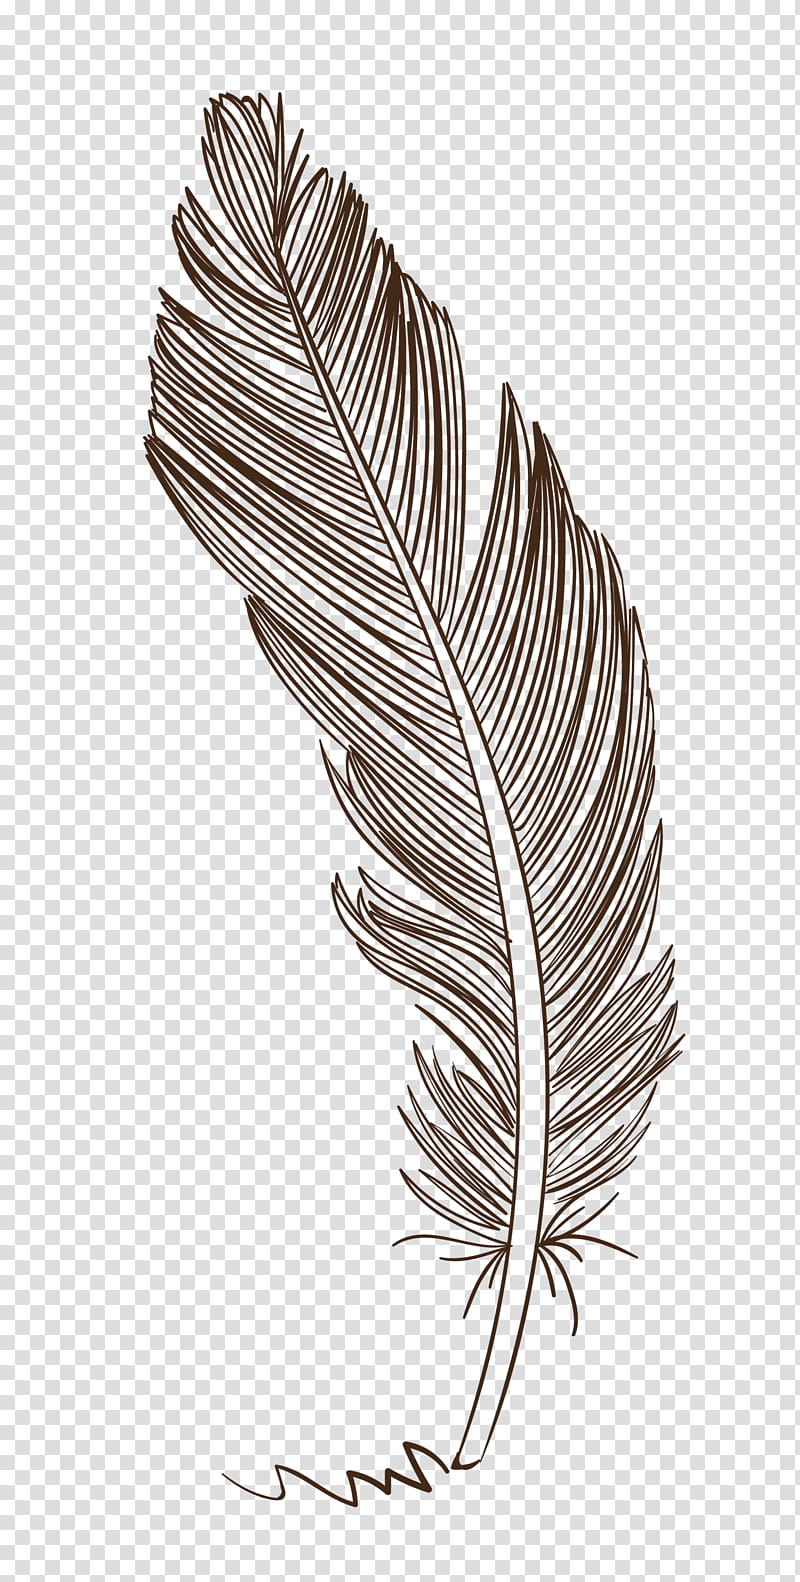 Bird Line Drawing, Quill, Cartoon, Feather, Leaf, Black And White
, Plant, Material transparent background PNG clipart